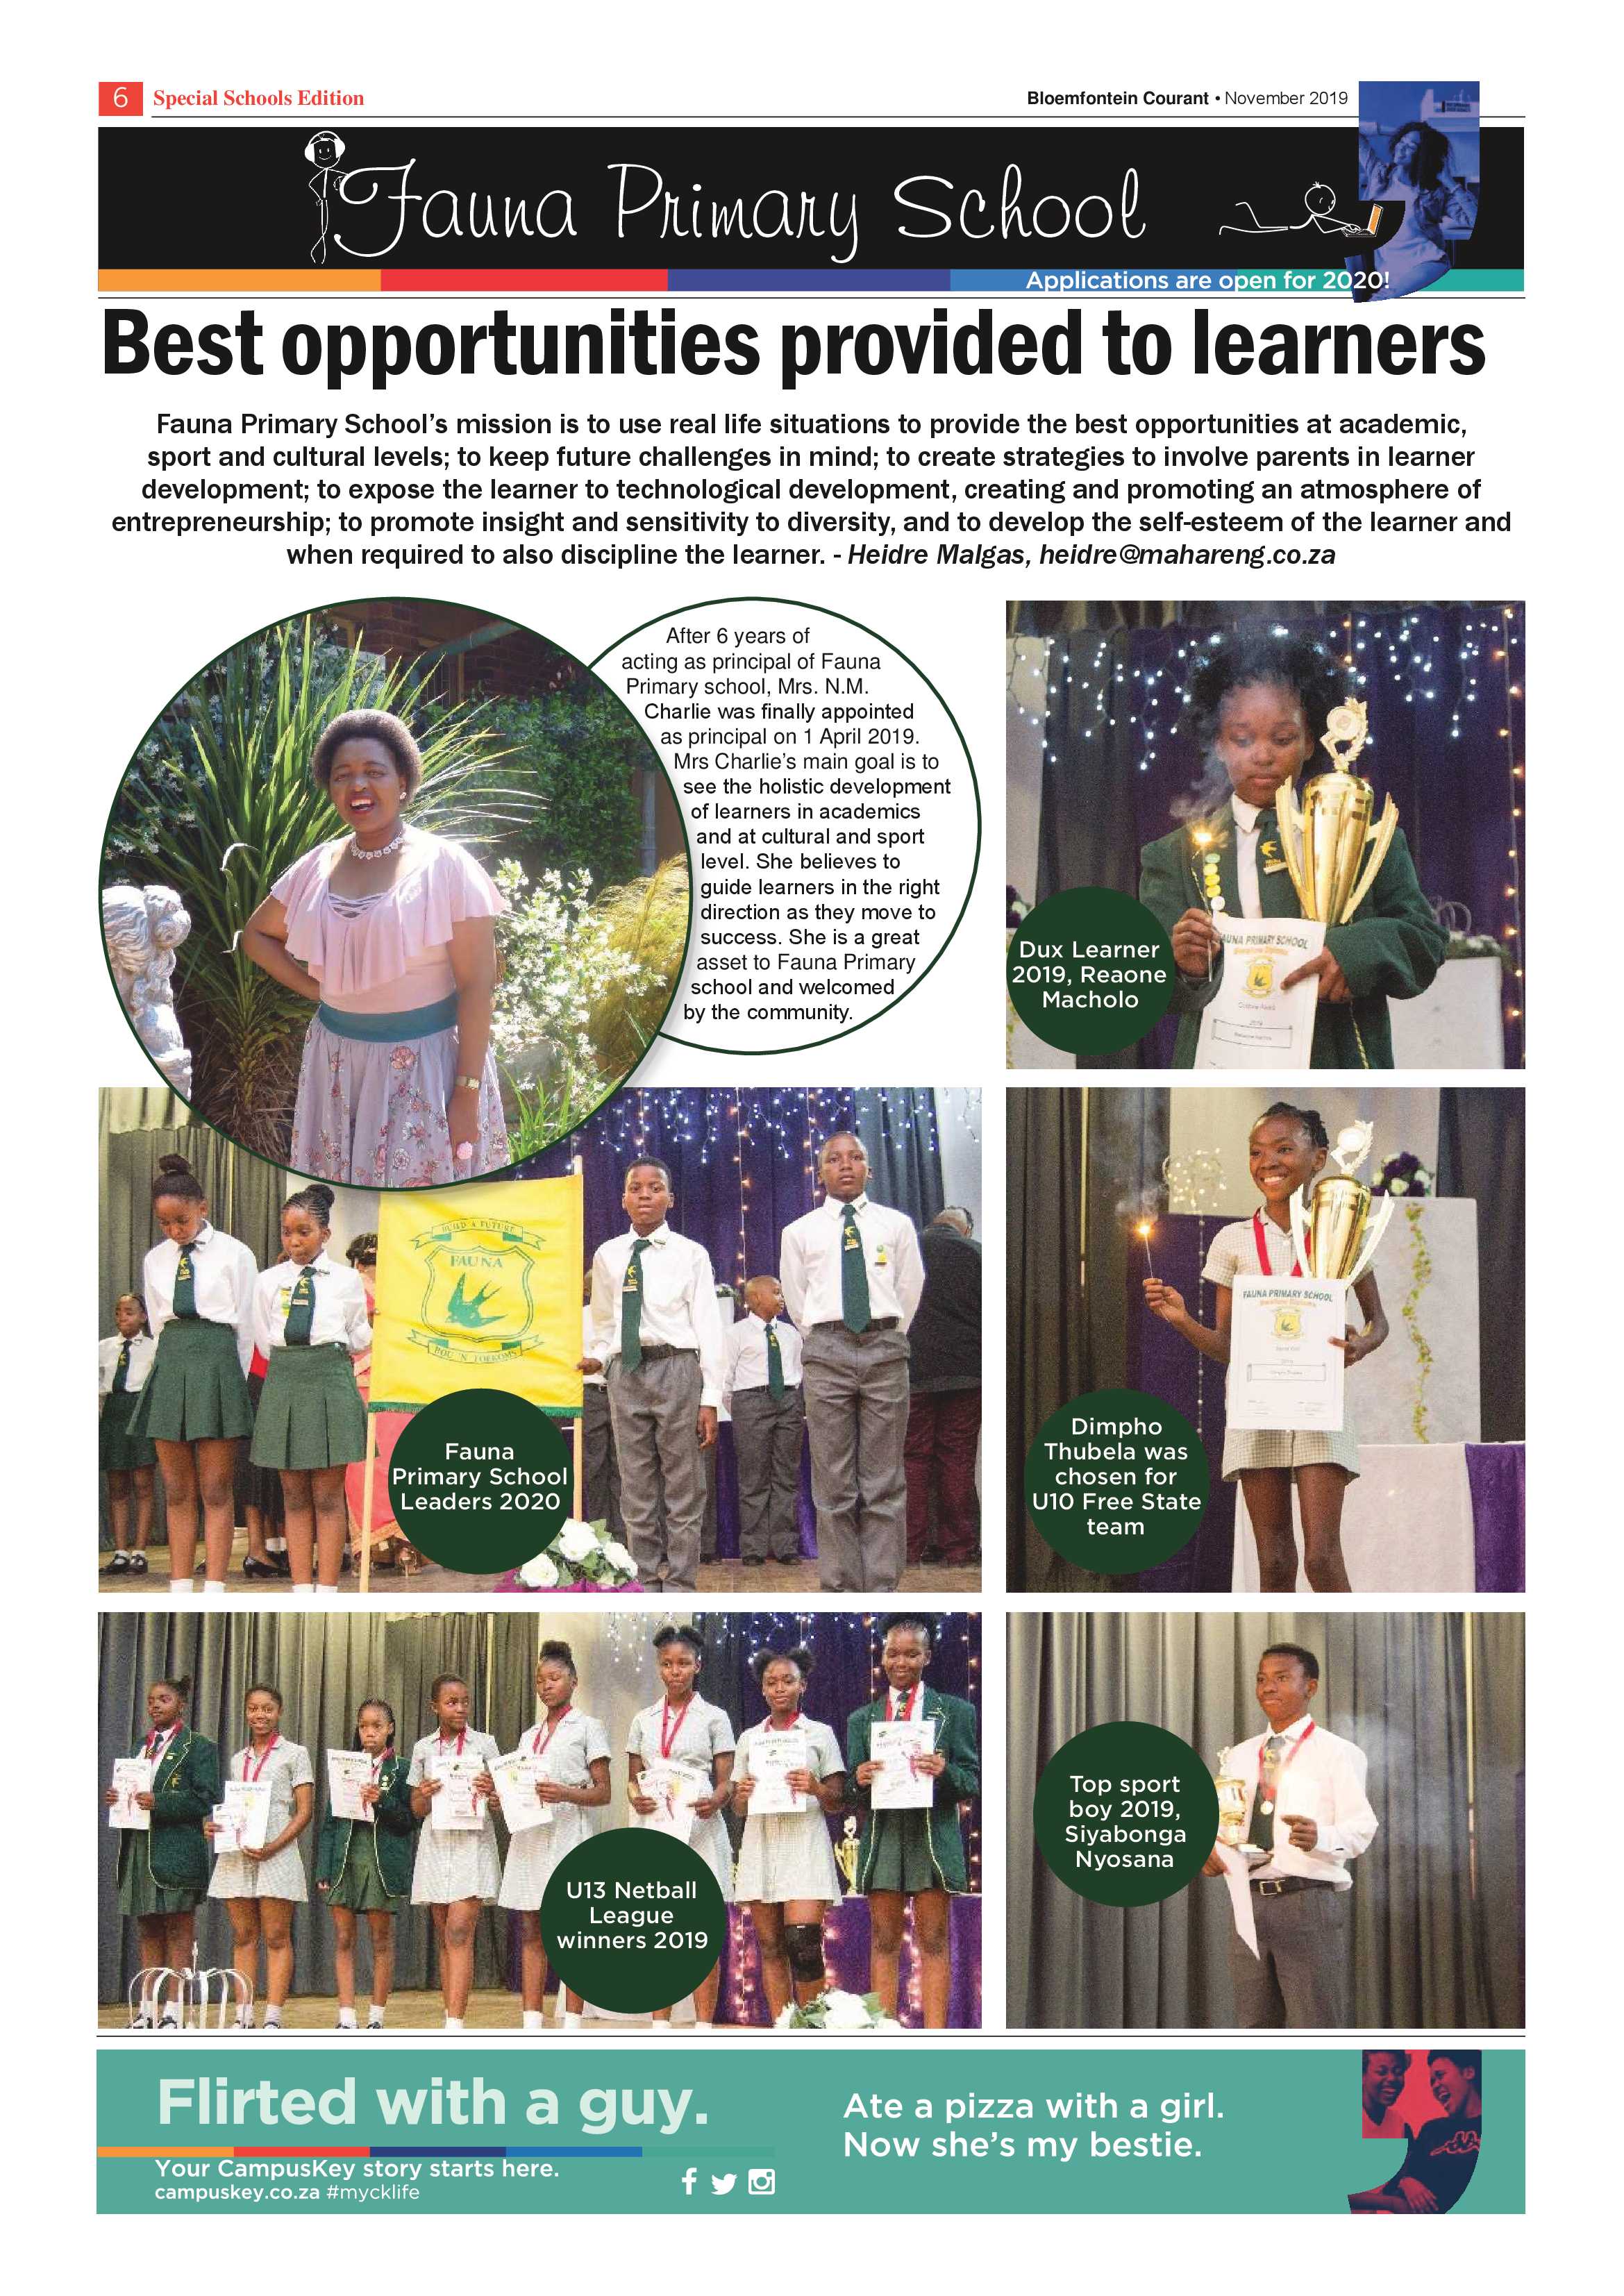 courant-15-november-2019-school-special-edition-epapers-page-6